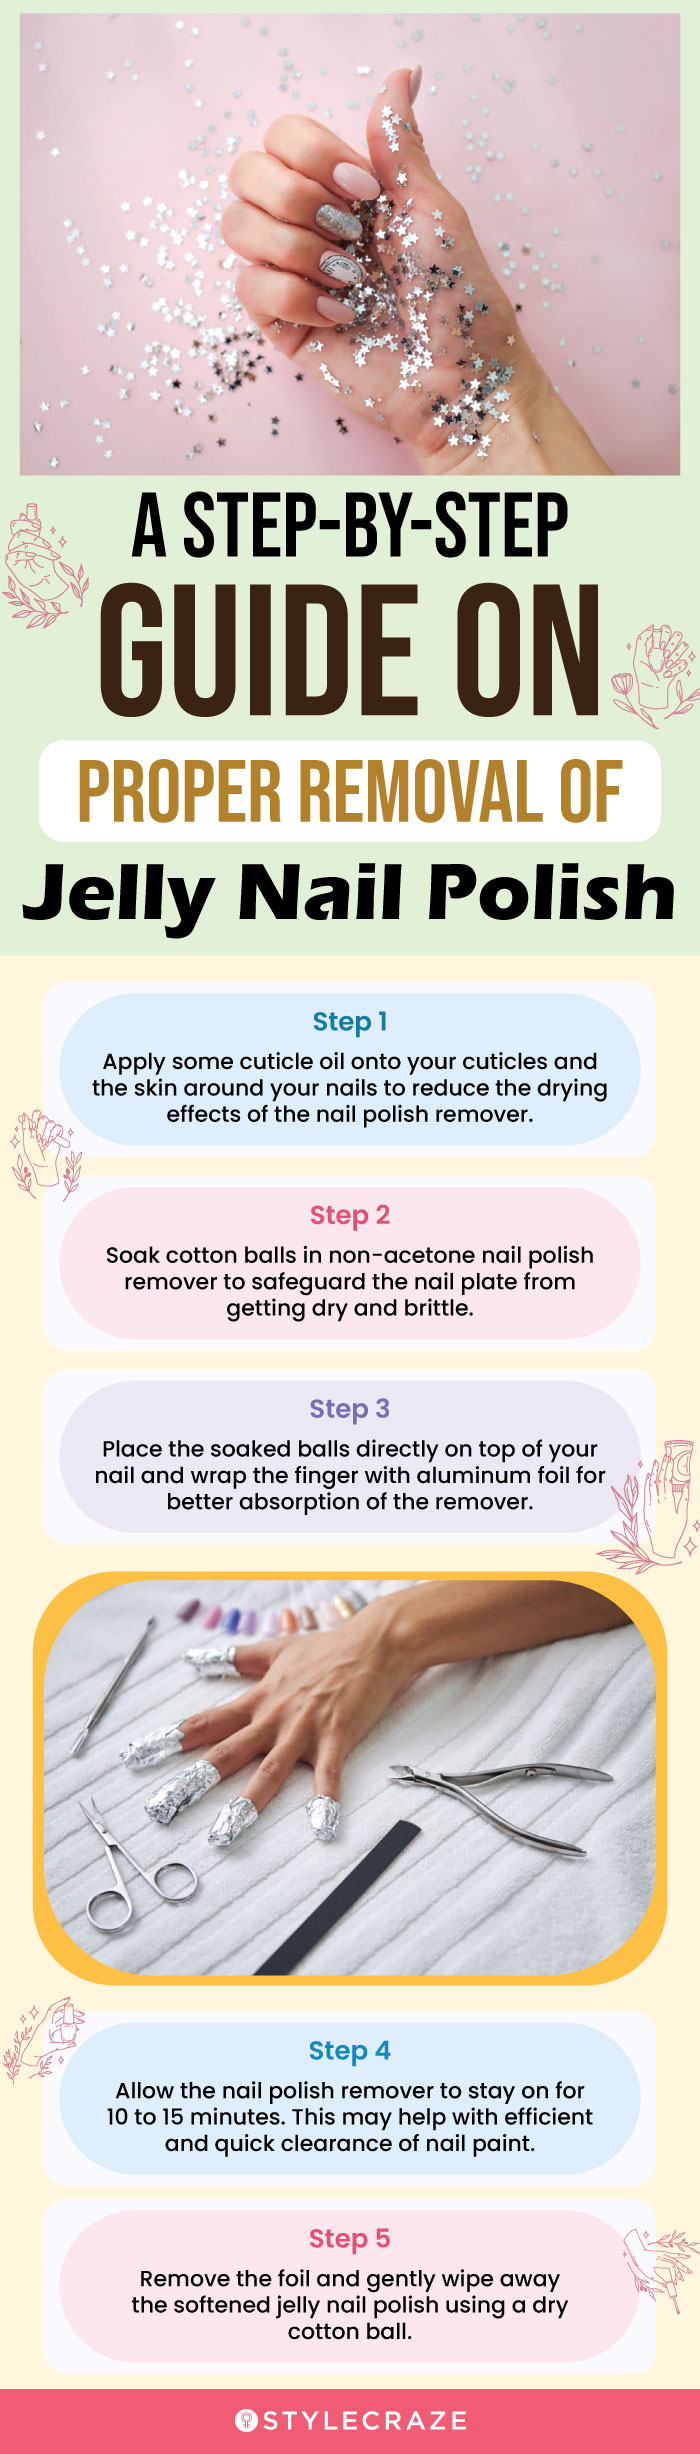 A Step-By-Step Guide On Proper Removal Of Jelly Nail Polish (infographic)